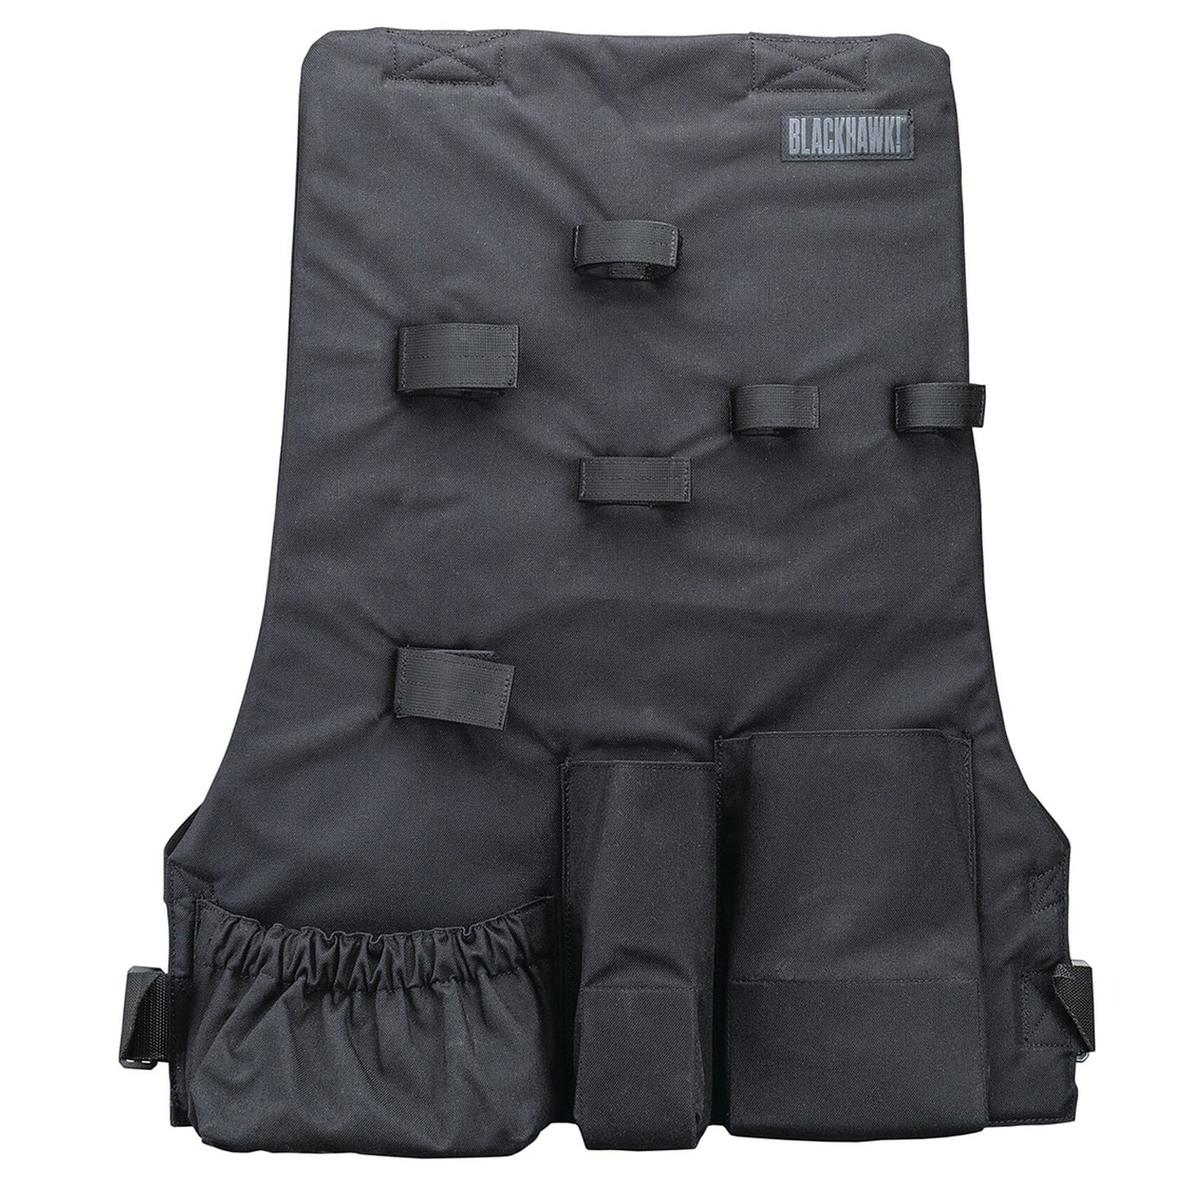 Manual Entry Tool Back Pack
Dynamic Entry